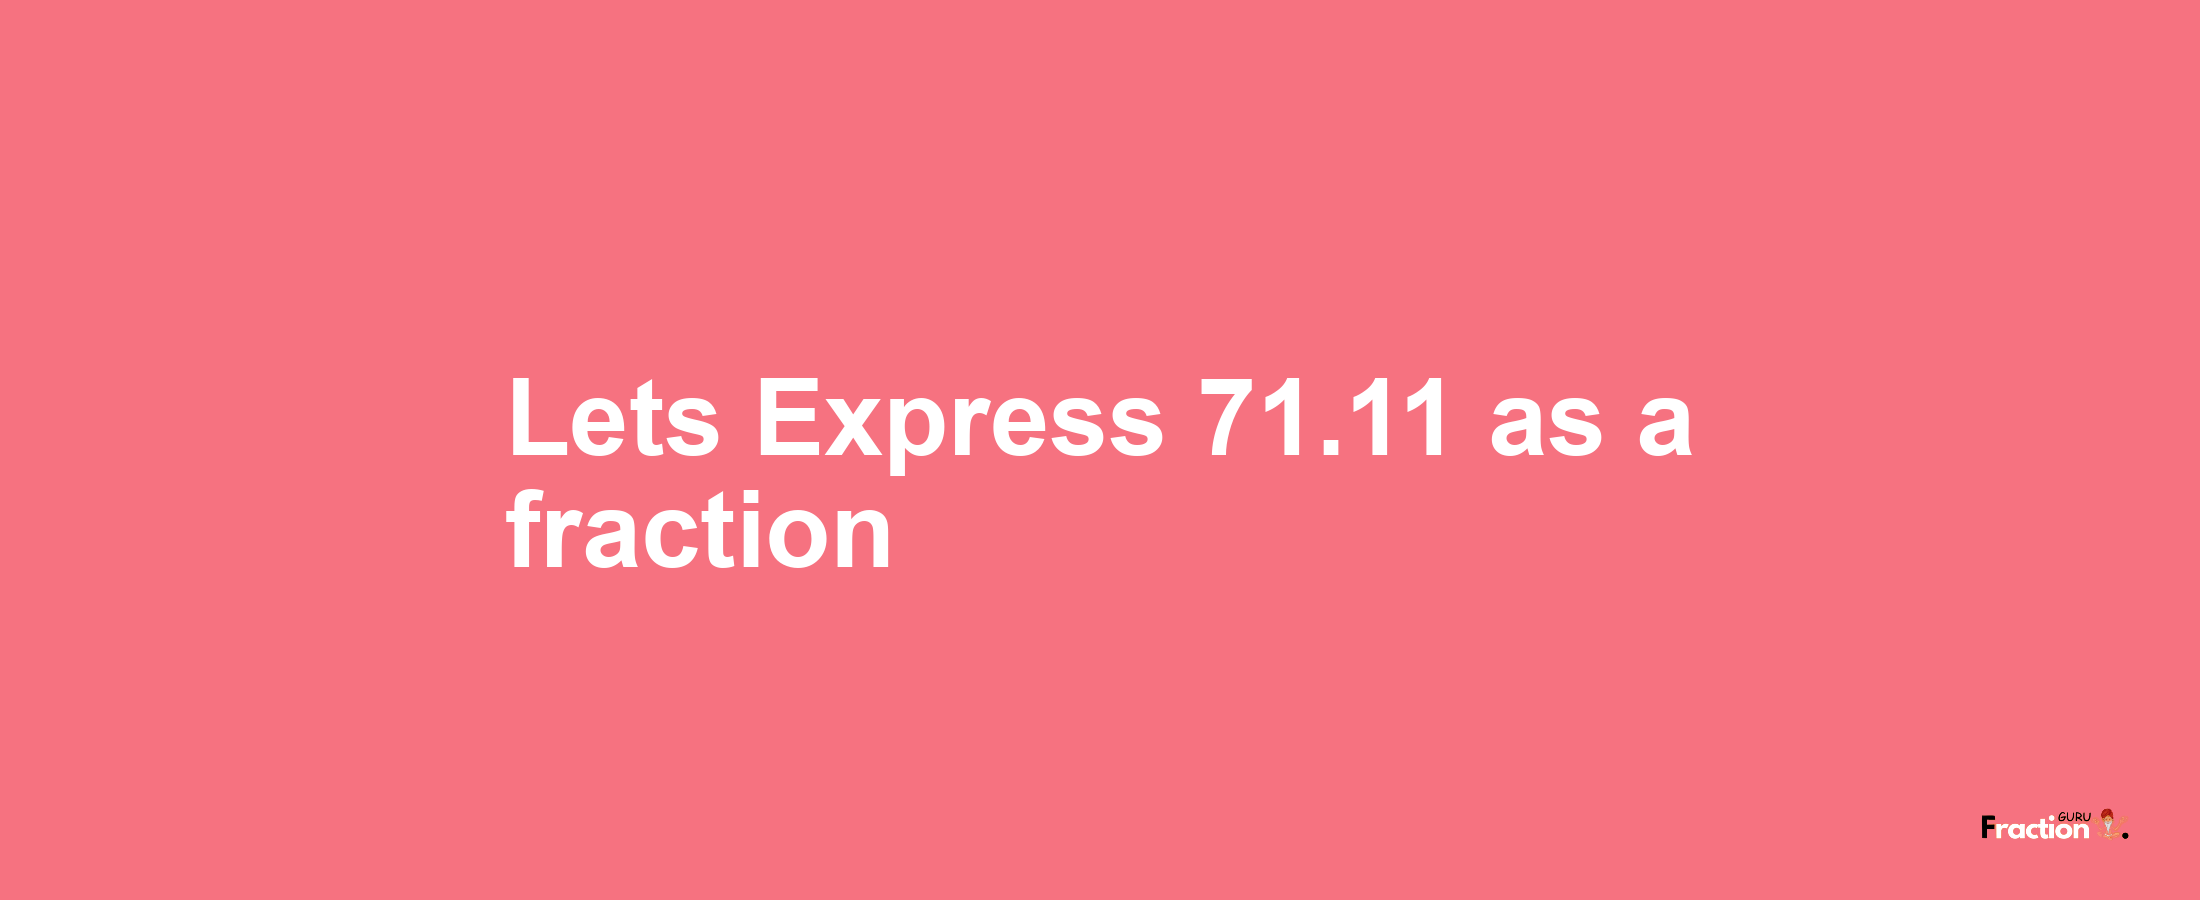 Lets Express 71.11 as afraction